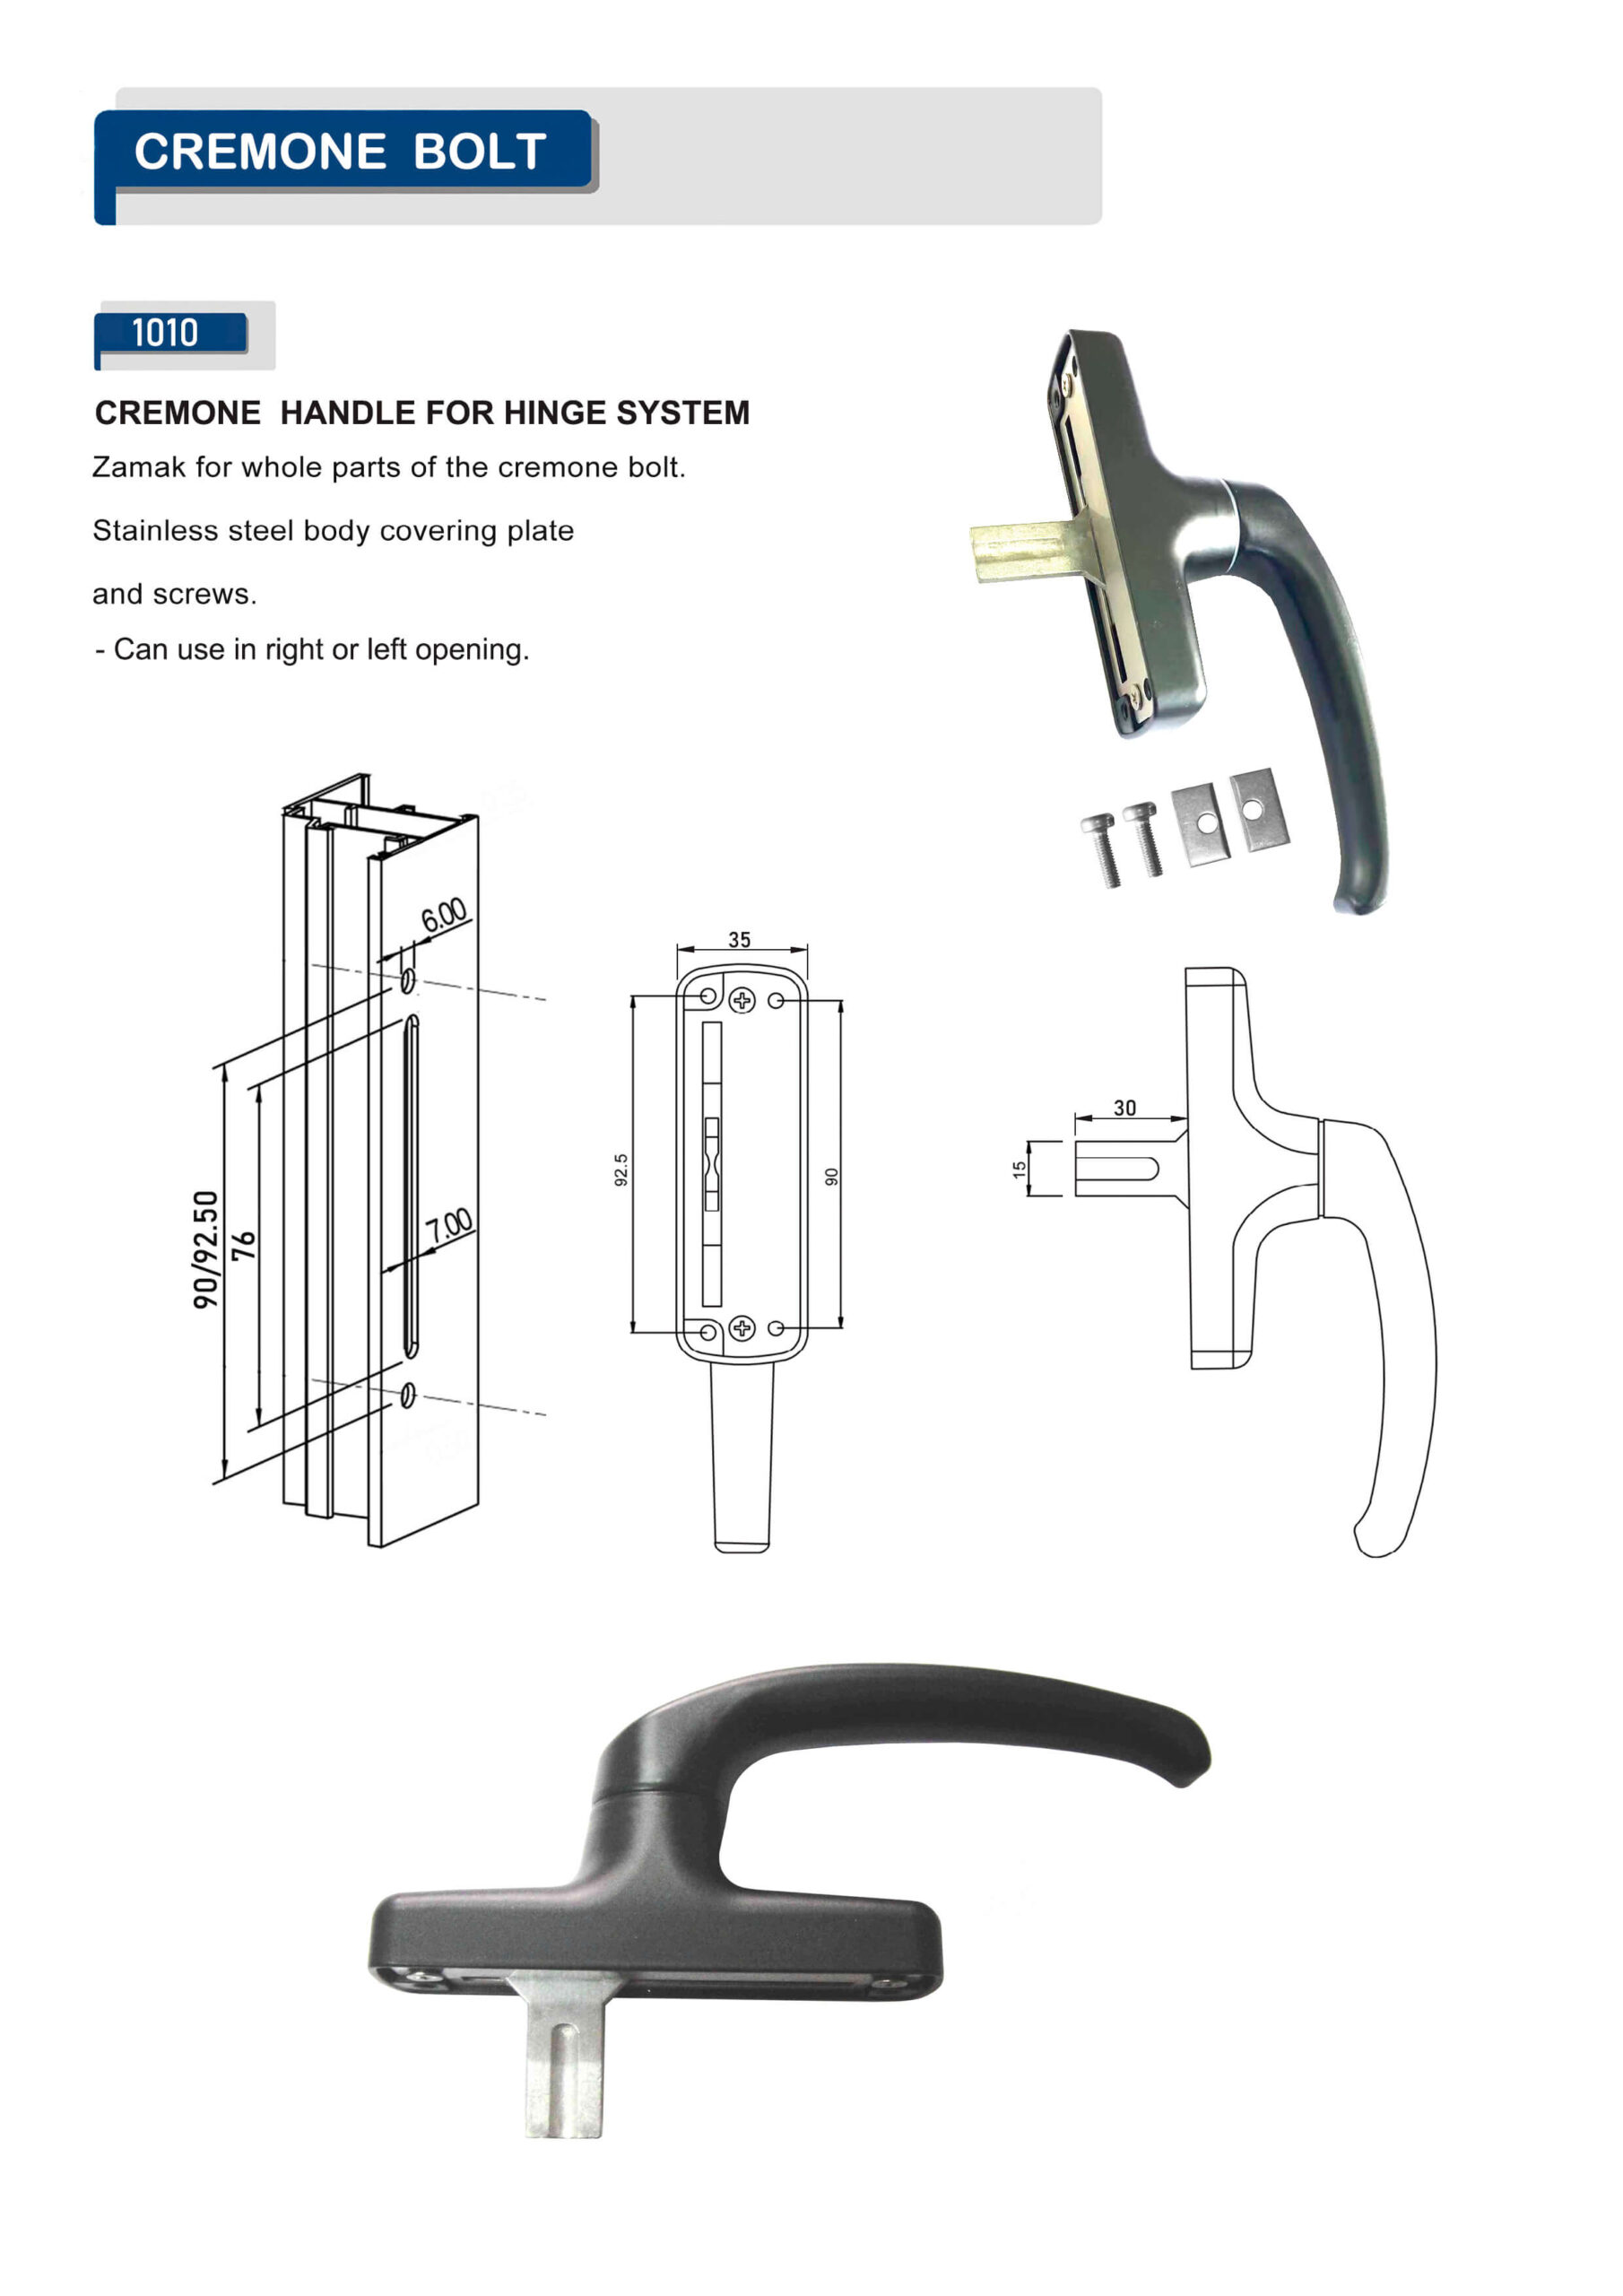 CREMONE HANDLE FOR HINGE SYSTEM